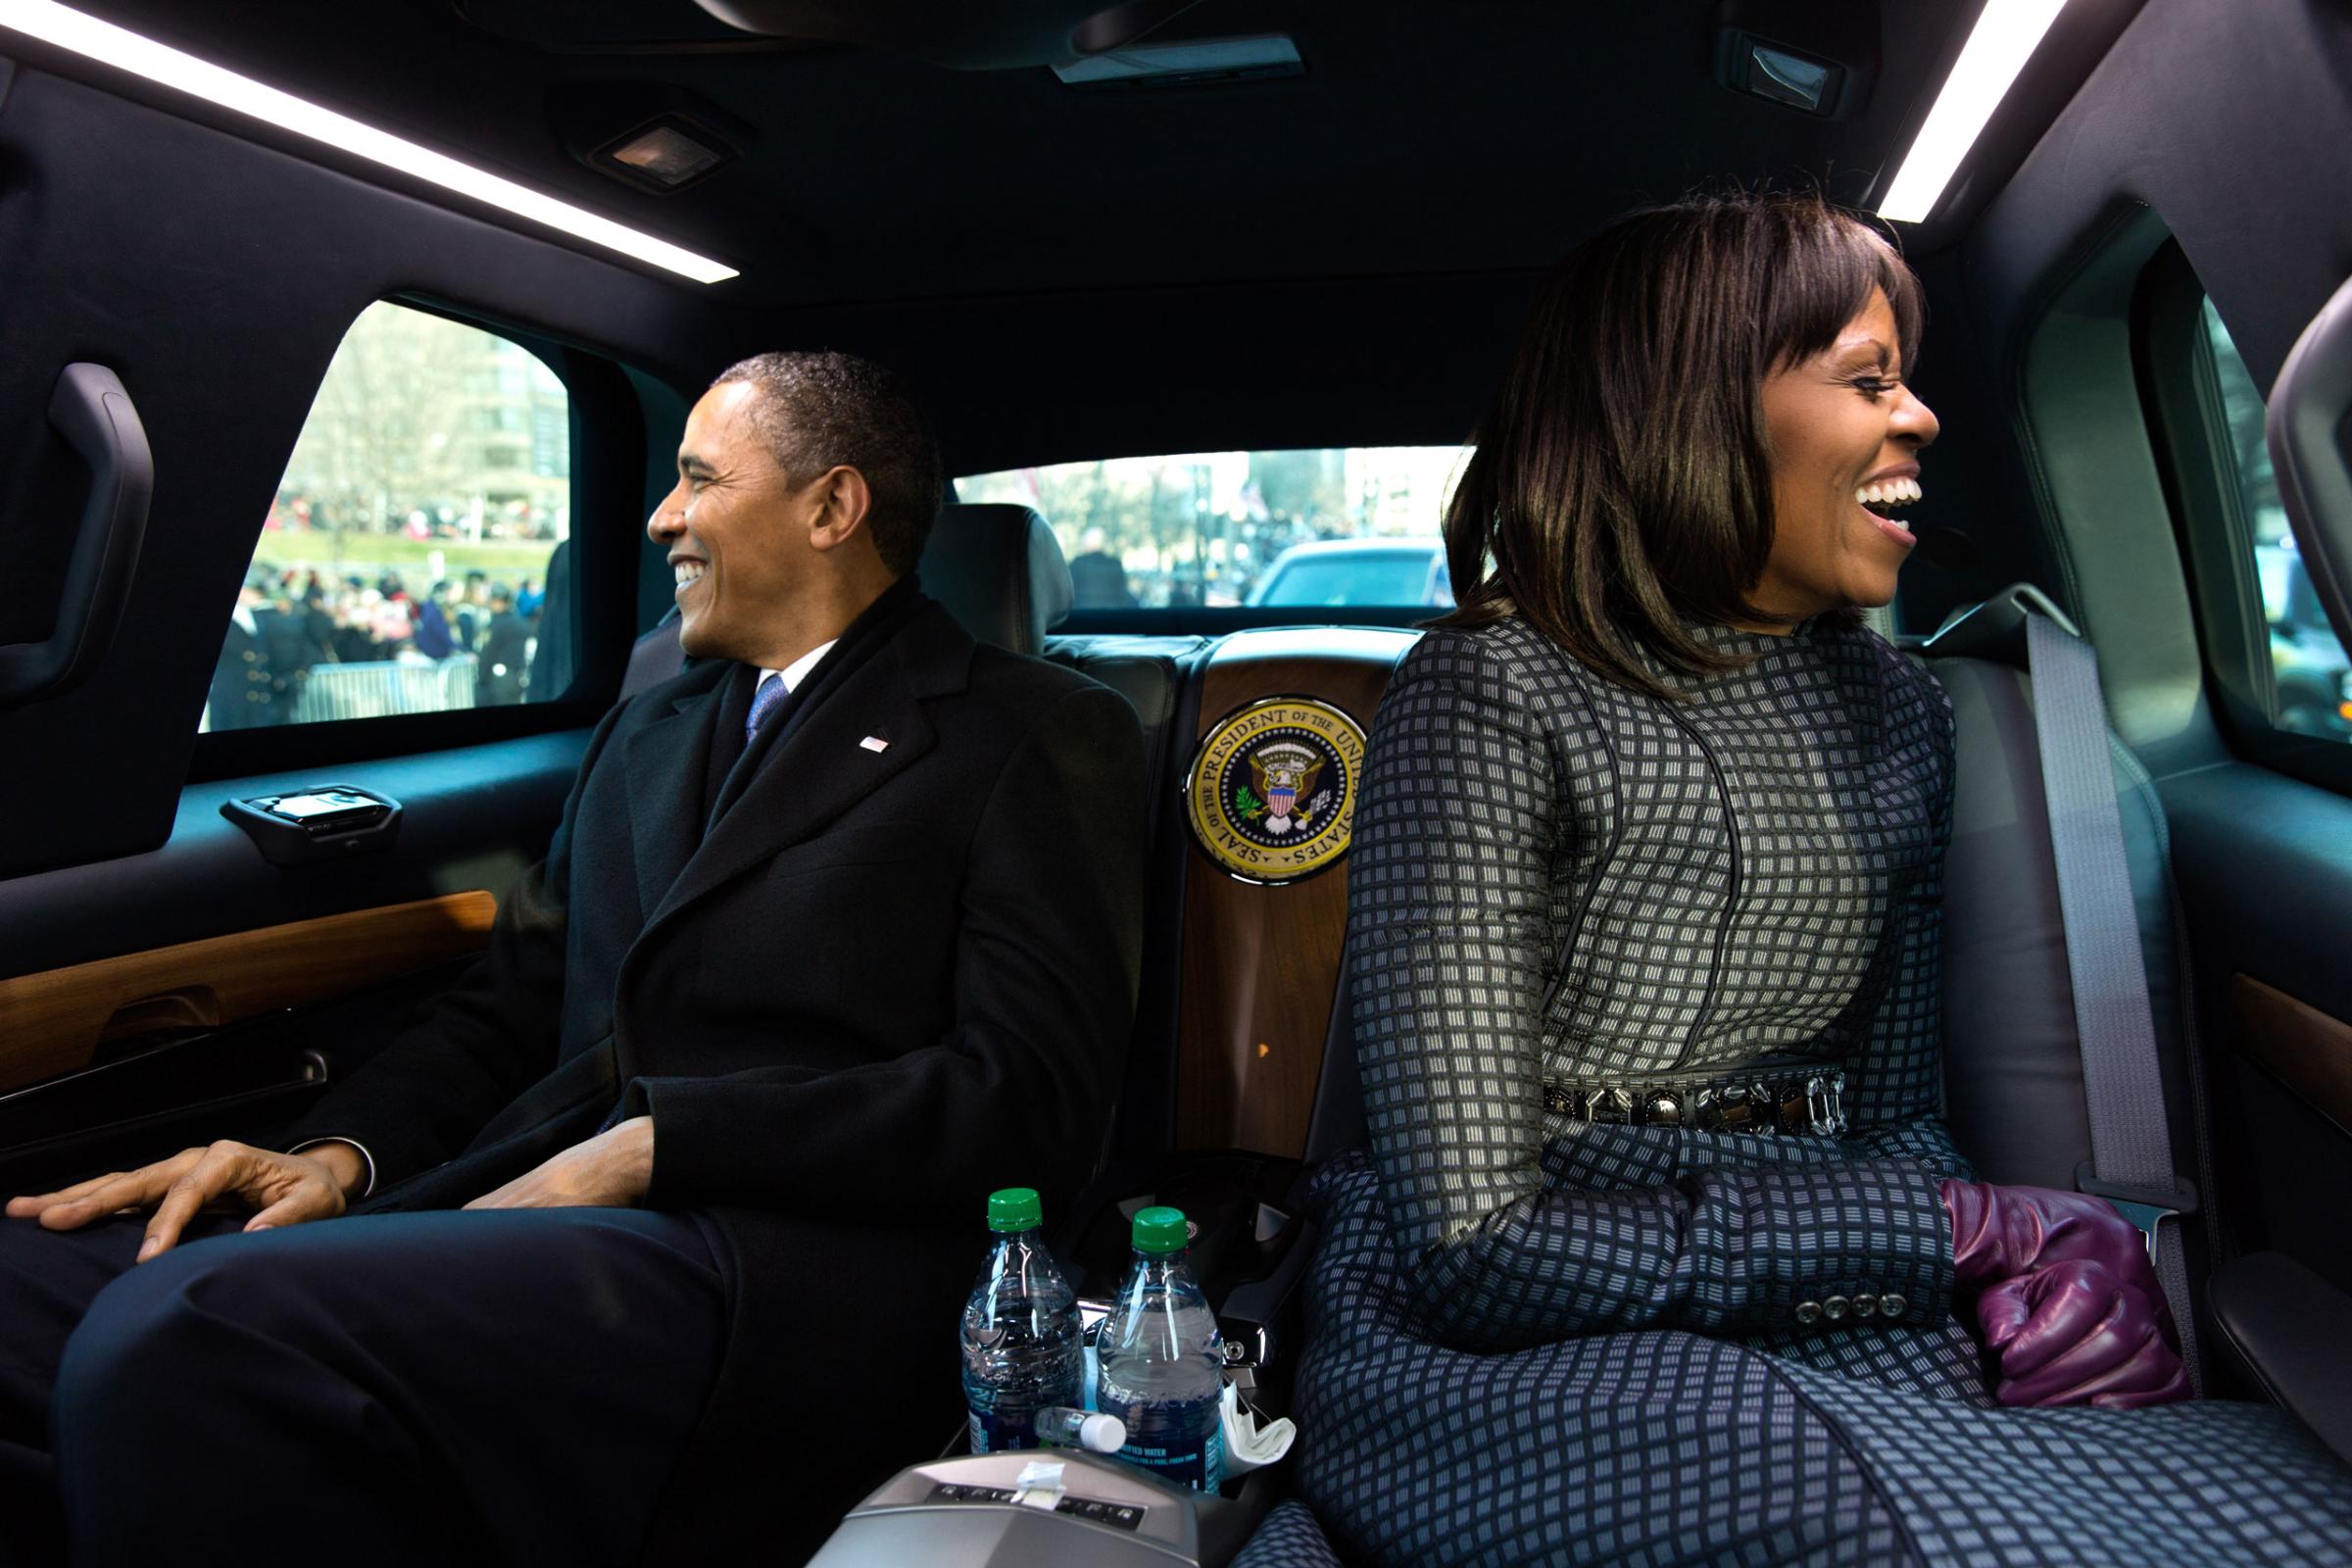 "The President and First Lady wave to supporters as they ride in the inaugural parade. I had asked the President if I could ride in the presidential limousine and the President joked, 'But Michelle and I were planning to make out," Jan.21, 2013.